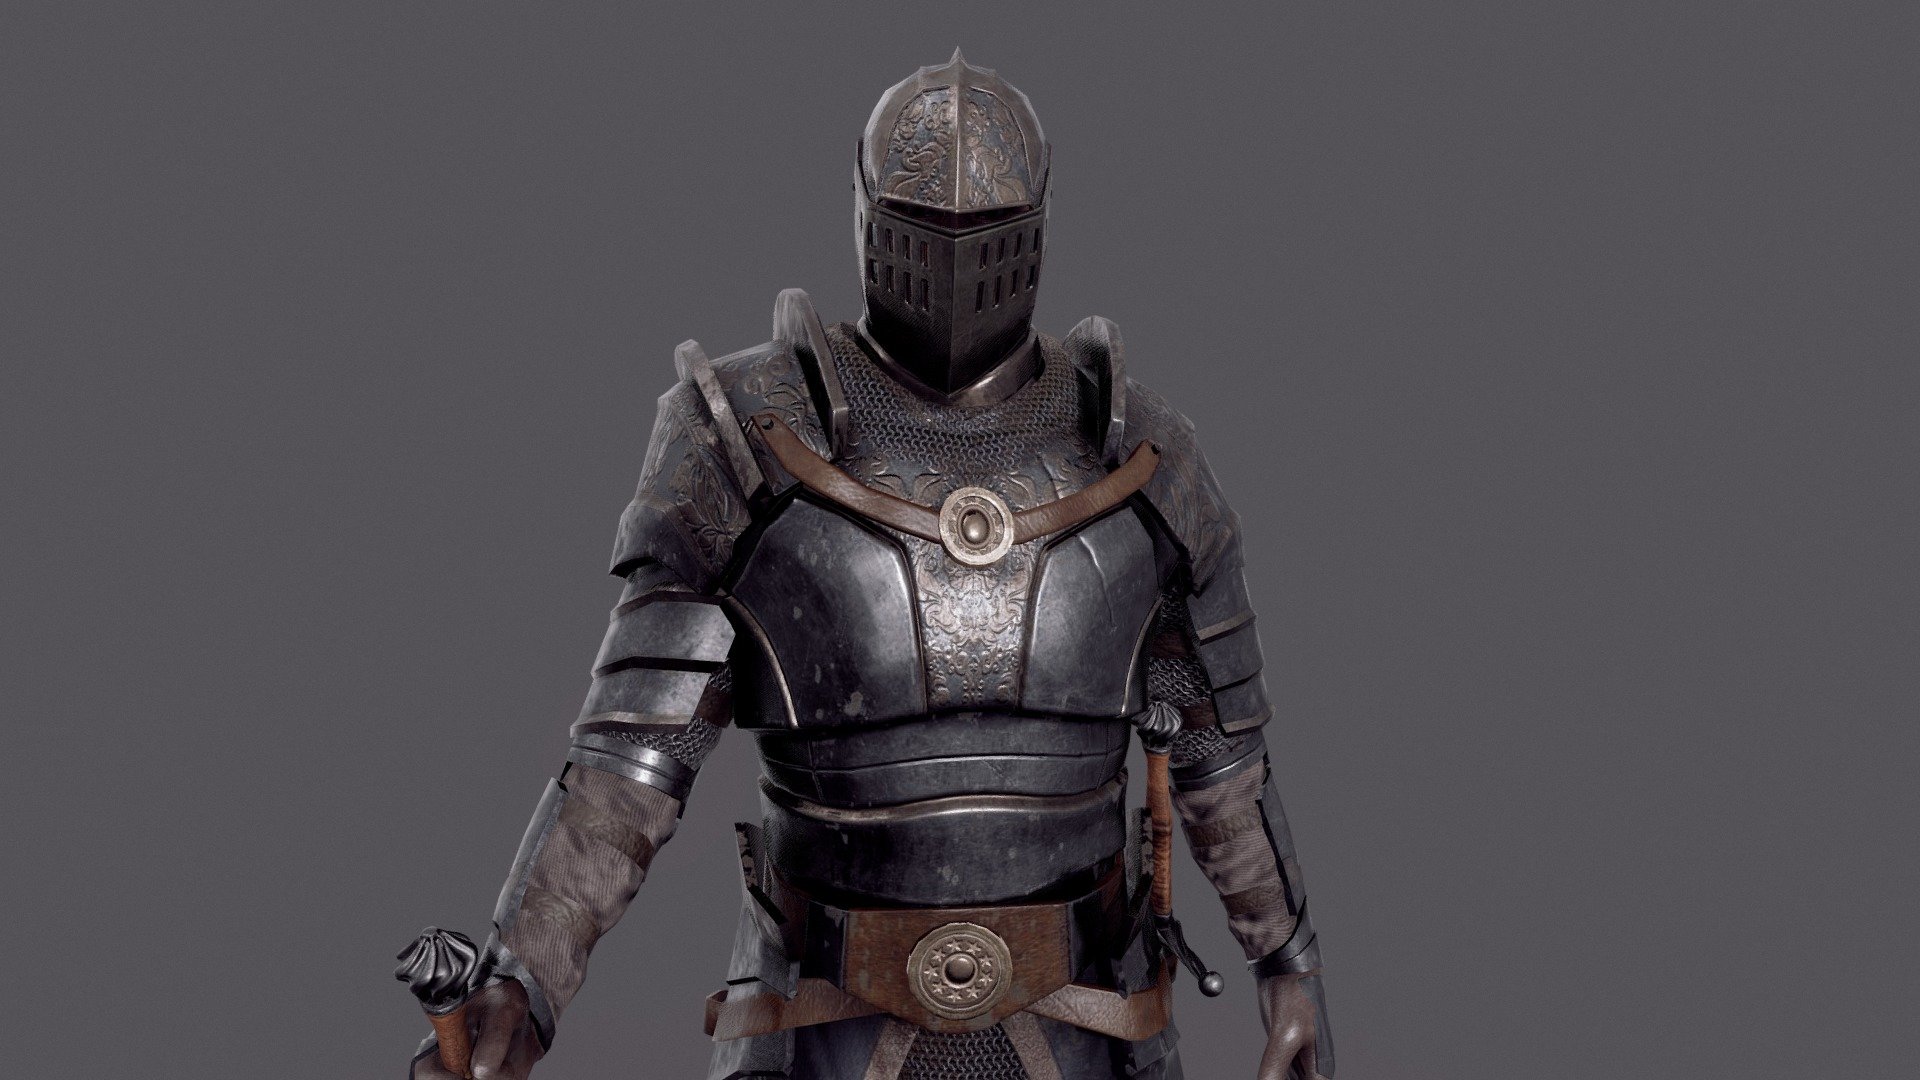 Knight . 11k polys. 4k textures. (3ds max,substance painte,zbrush) - Knight - 3D model by FrodaJan 3d model